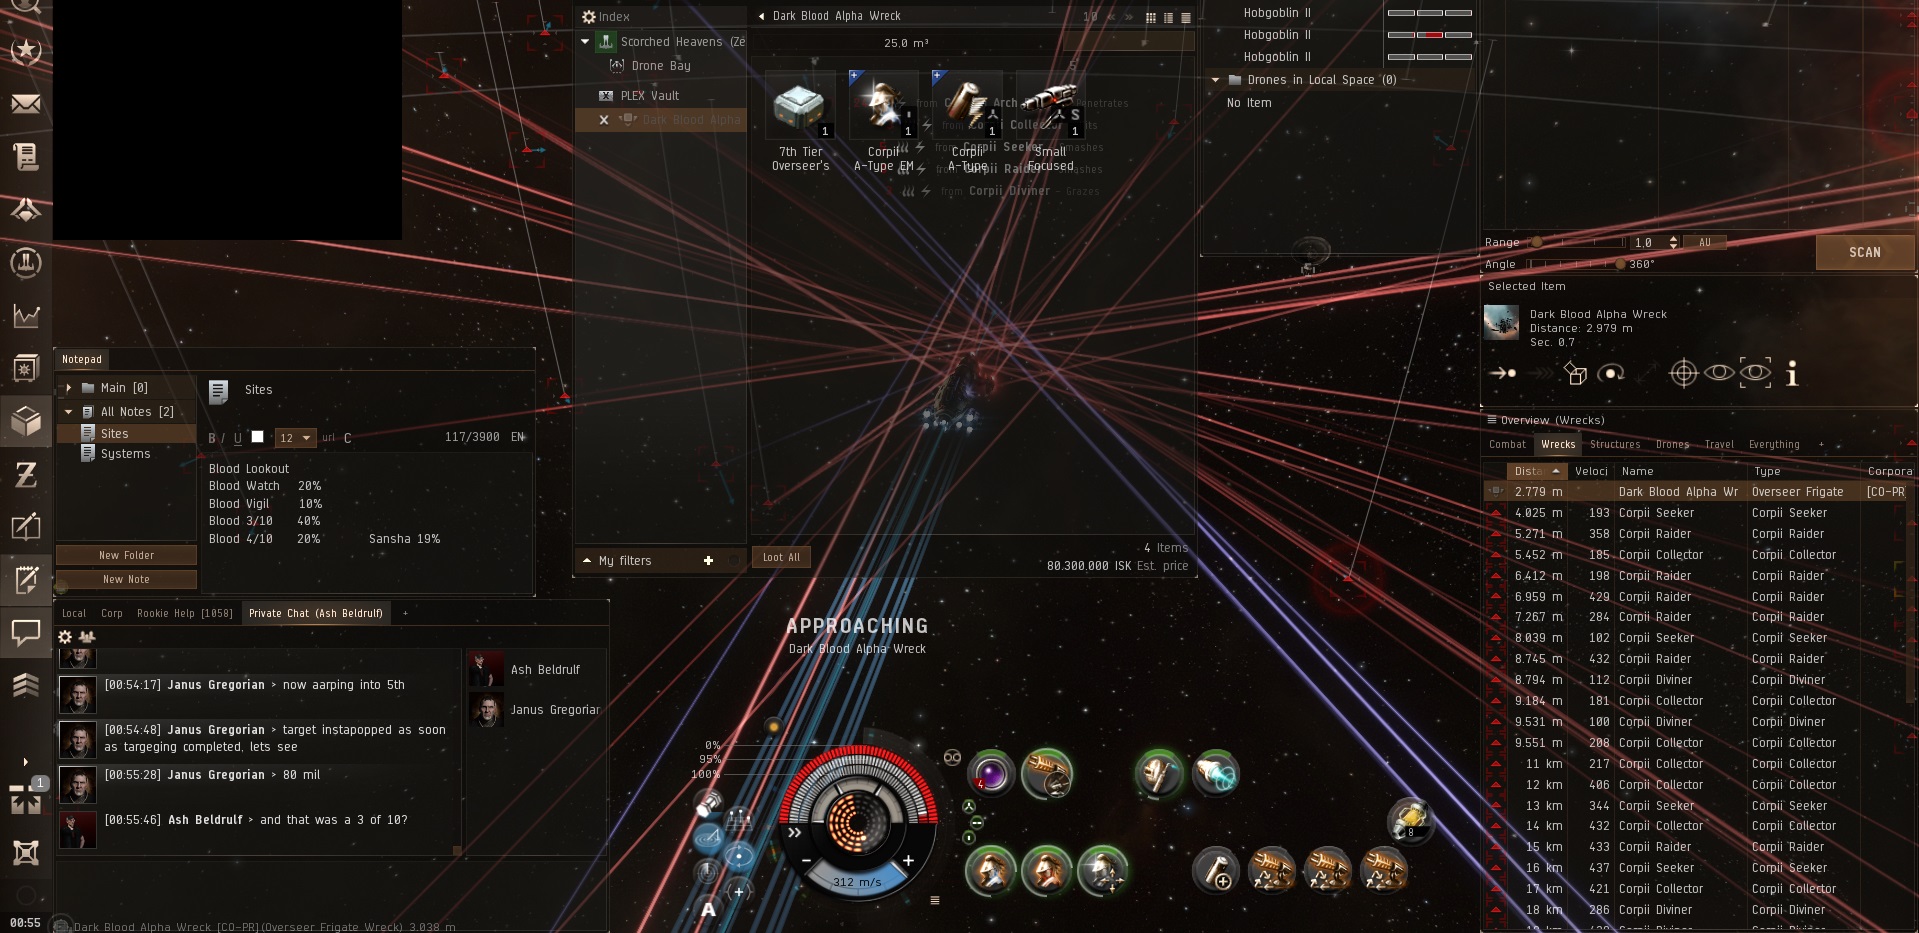 EVE Search - The reality - miners make 60+m isk per hour of gameplay